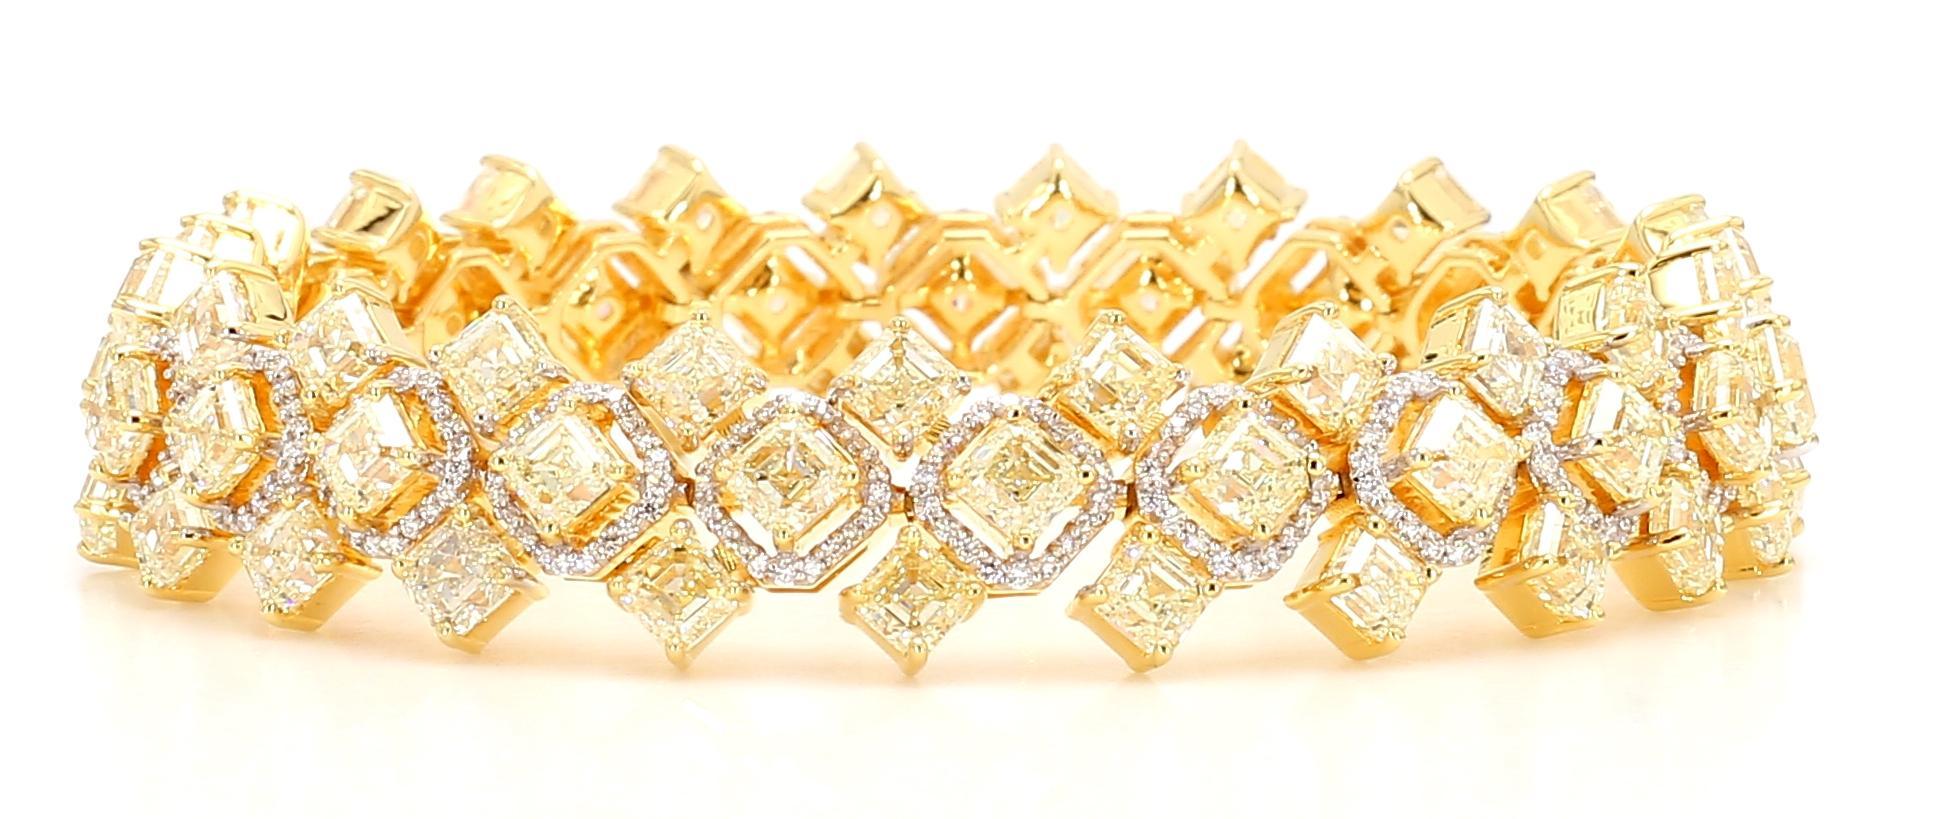 23.30 Carat Fancy Yellow Diamond Bracelet 18K White Gold In New Condition For Sale In New York, NY